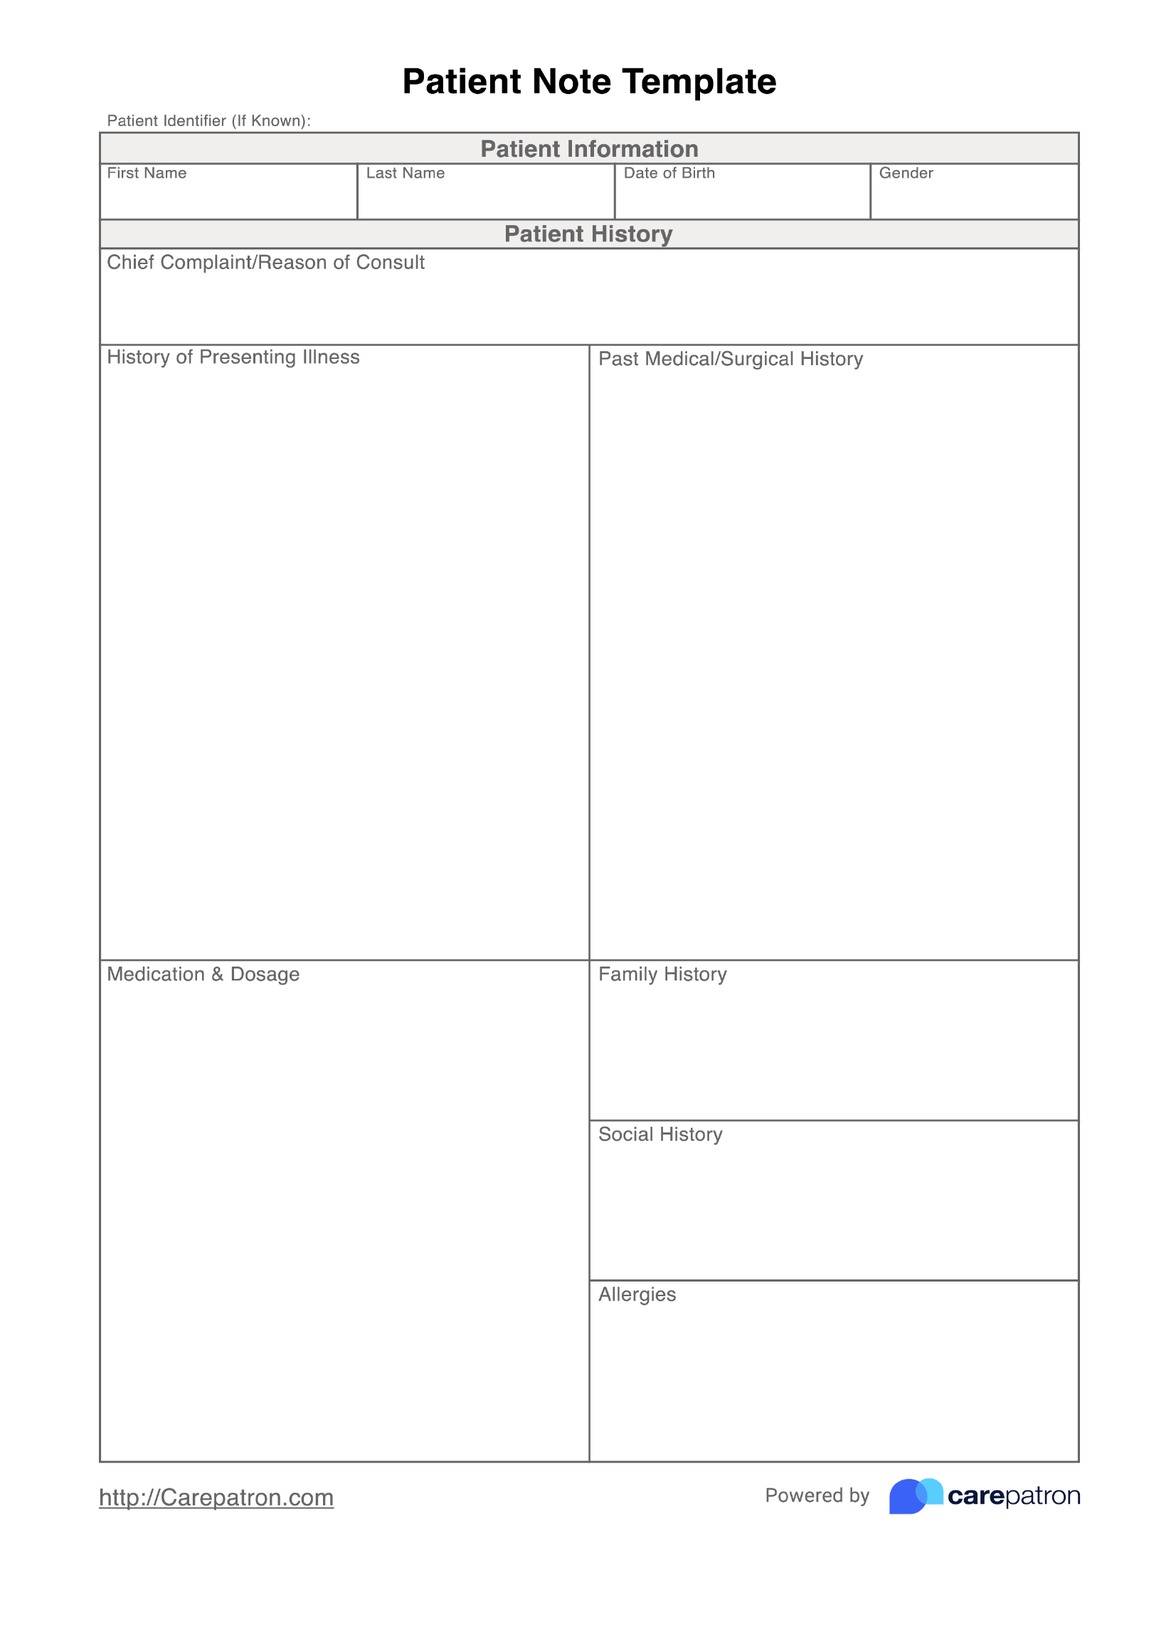 Patient Note Template PDF Example